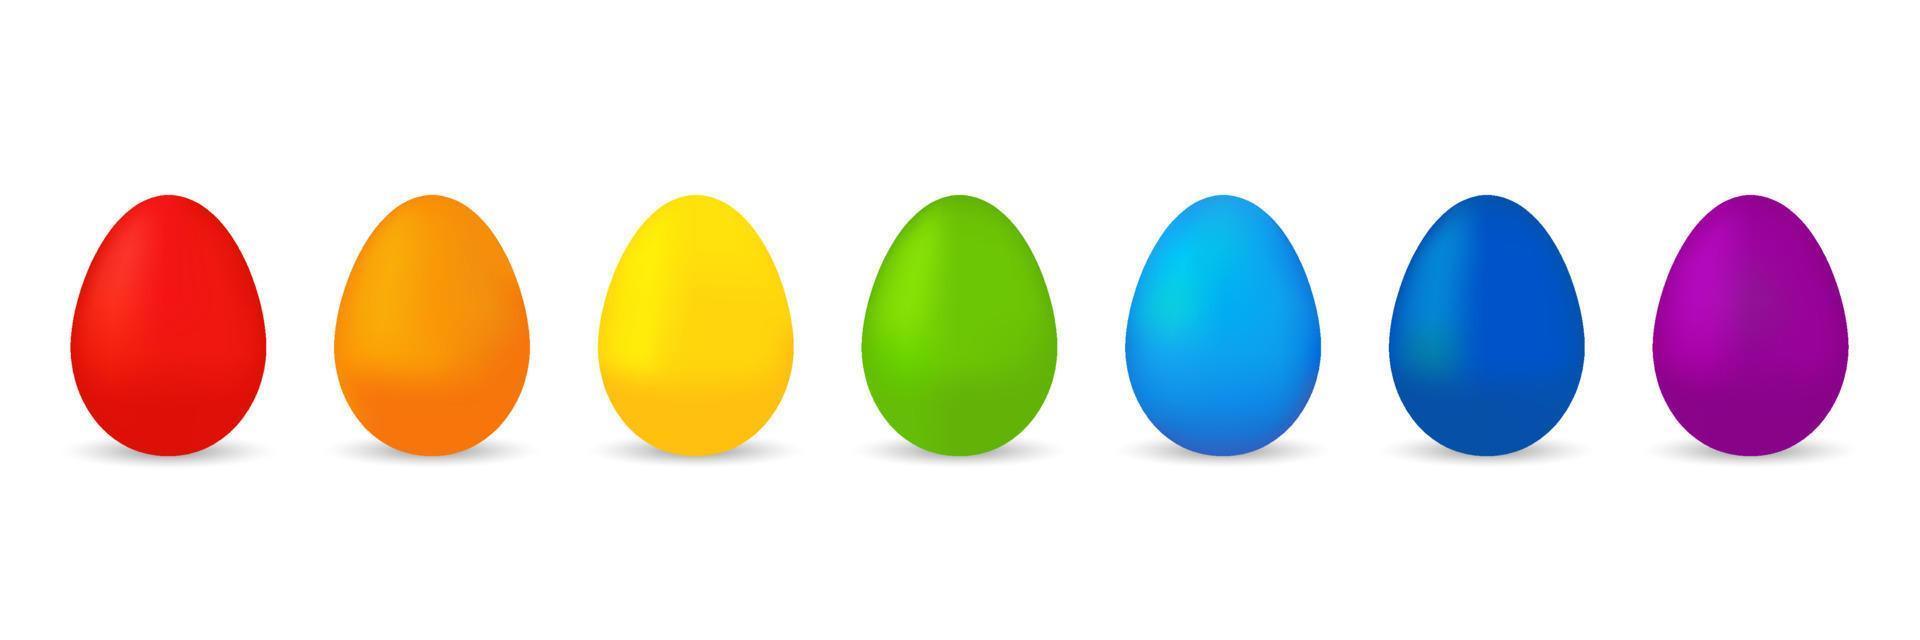 Set of colorful Easter eggs. vector